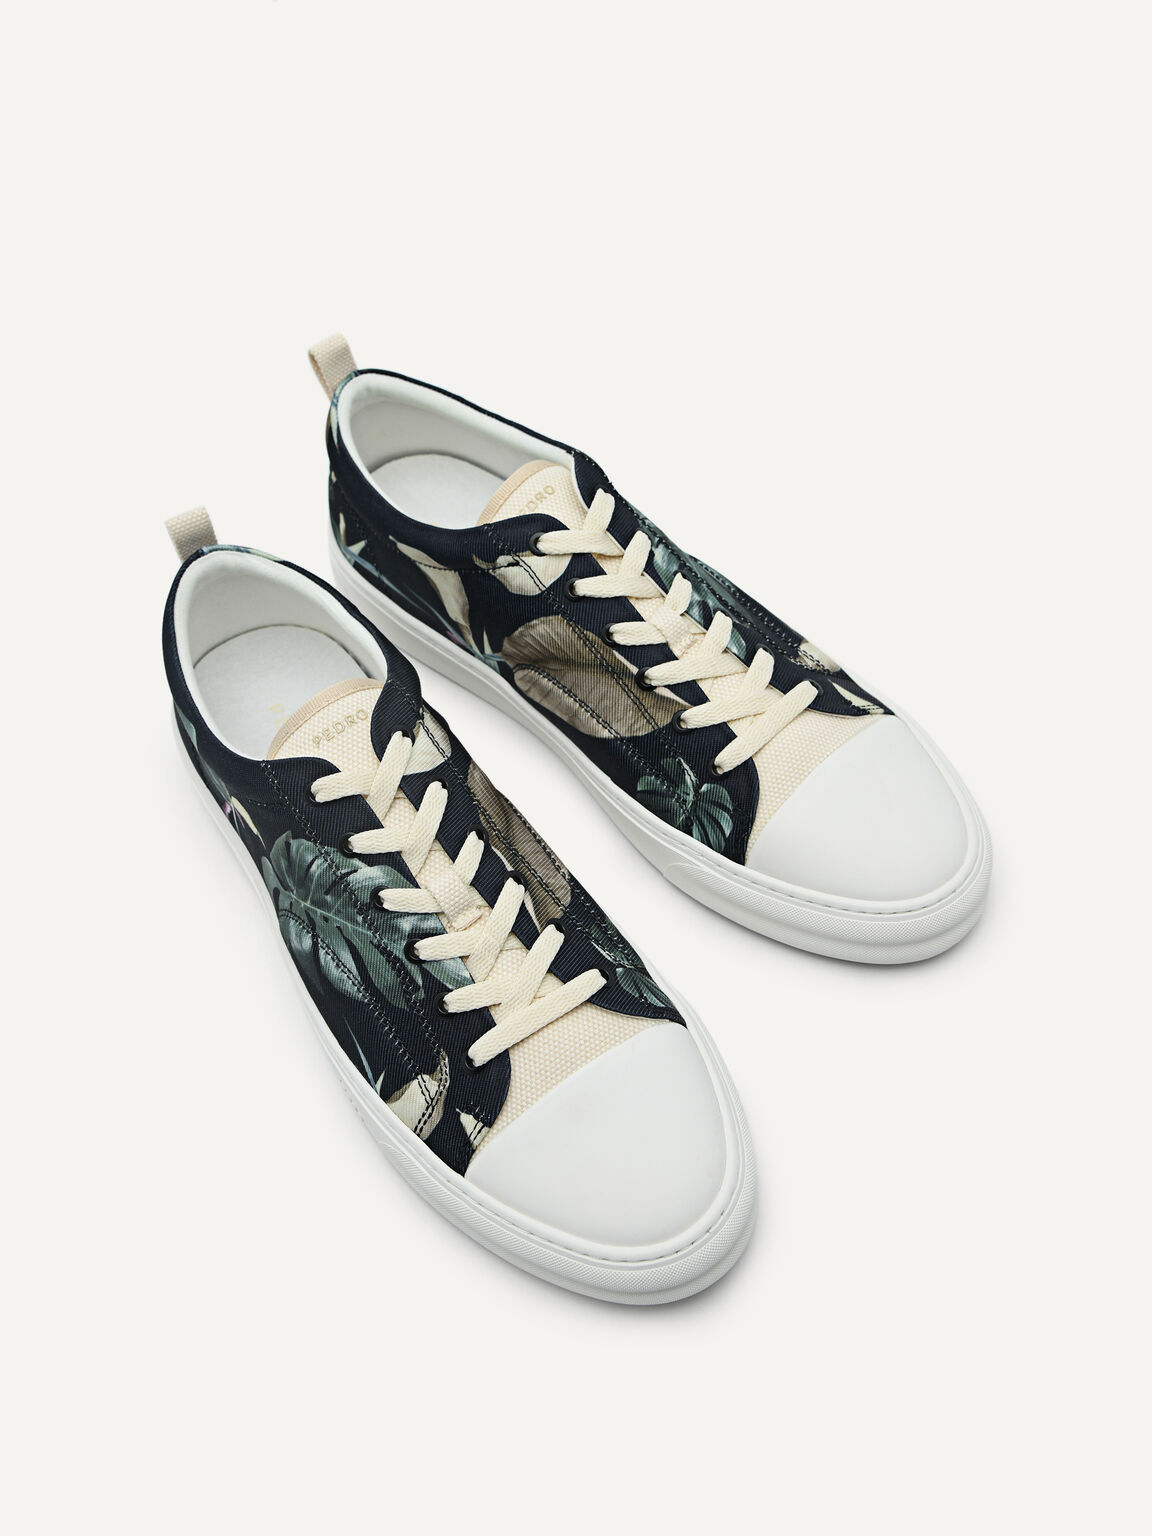 Lace-Up Sneakers, Multi